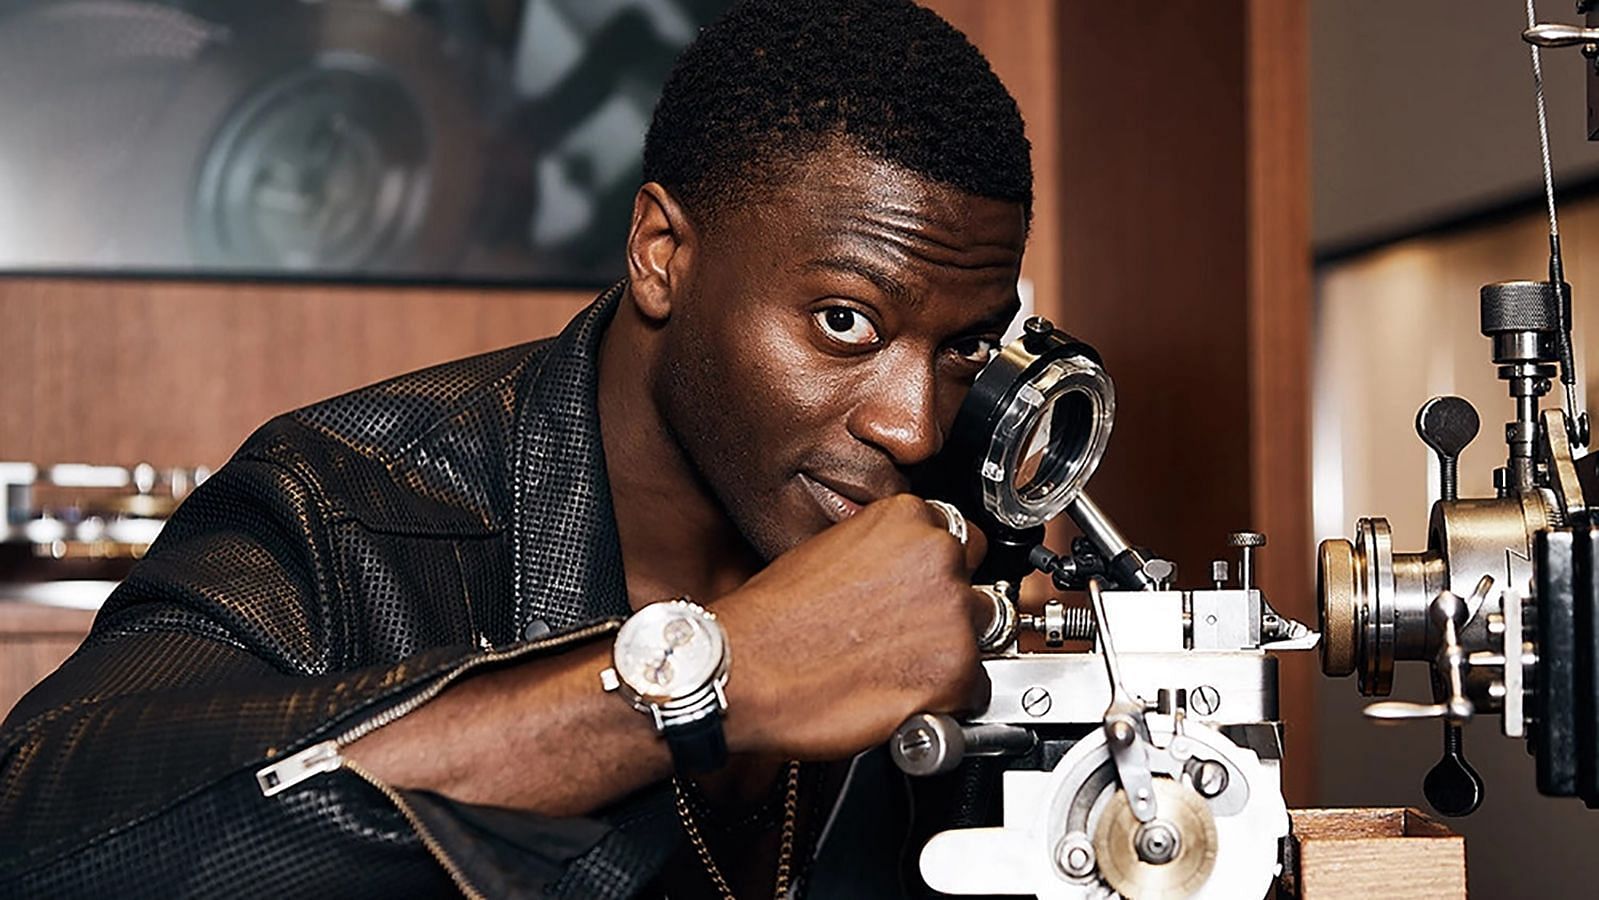 Aldis Hodge in front of his guilloche machine (Image via Kelsey Fain)